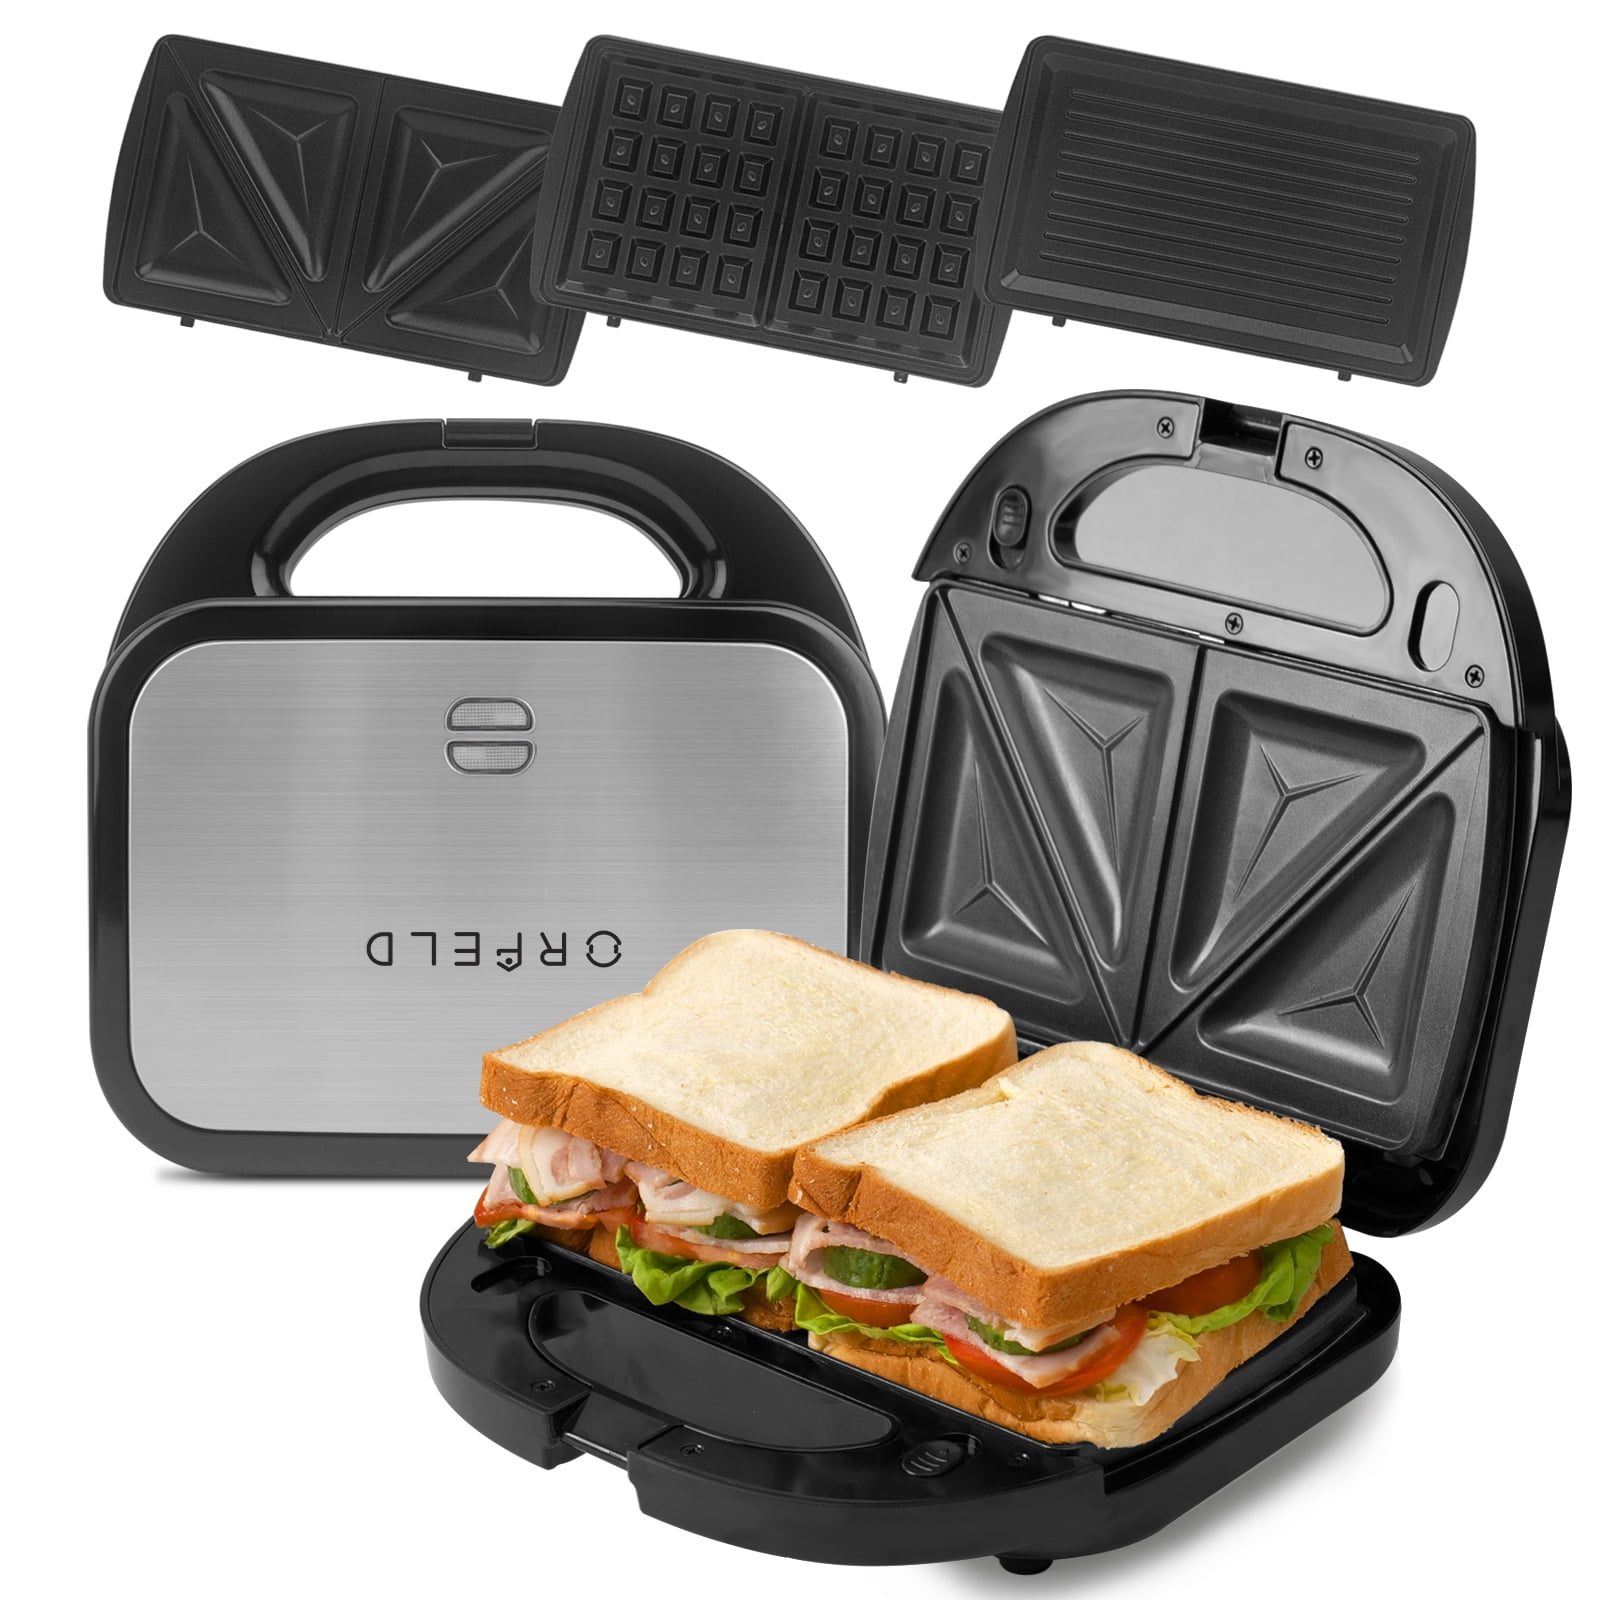 Toaster Toasting Sandwich Stainless Steel Home Office Sandwich Maker Machine Toaster with Removable Non-Stick Plate Electric Grill 750w 